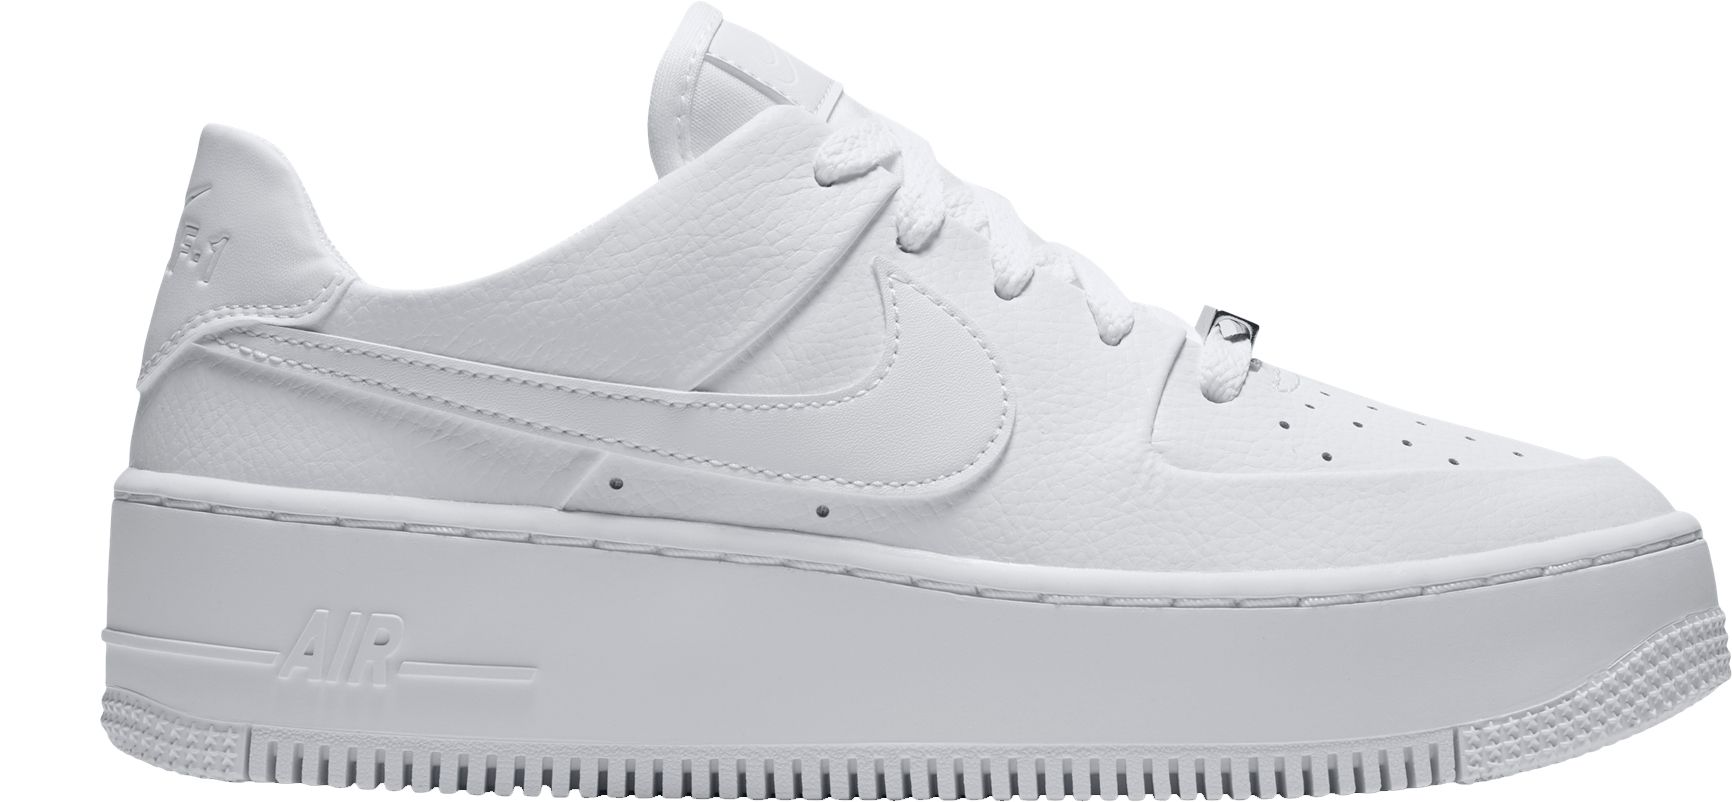 Nike Women's Air Force 1 Sage Shoes 